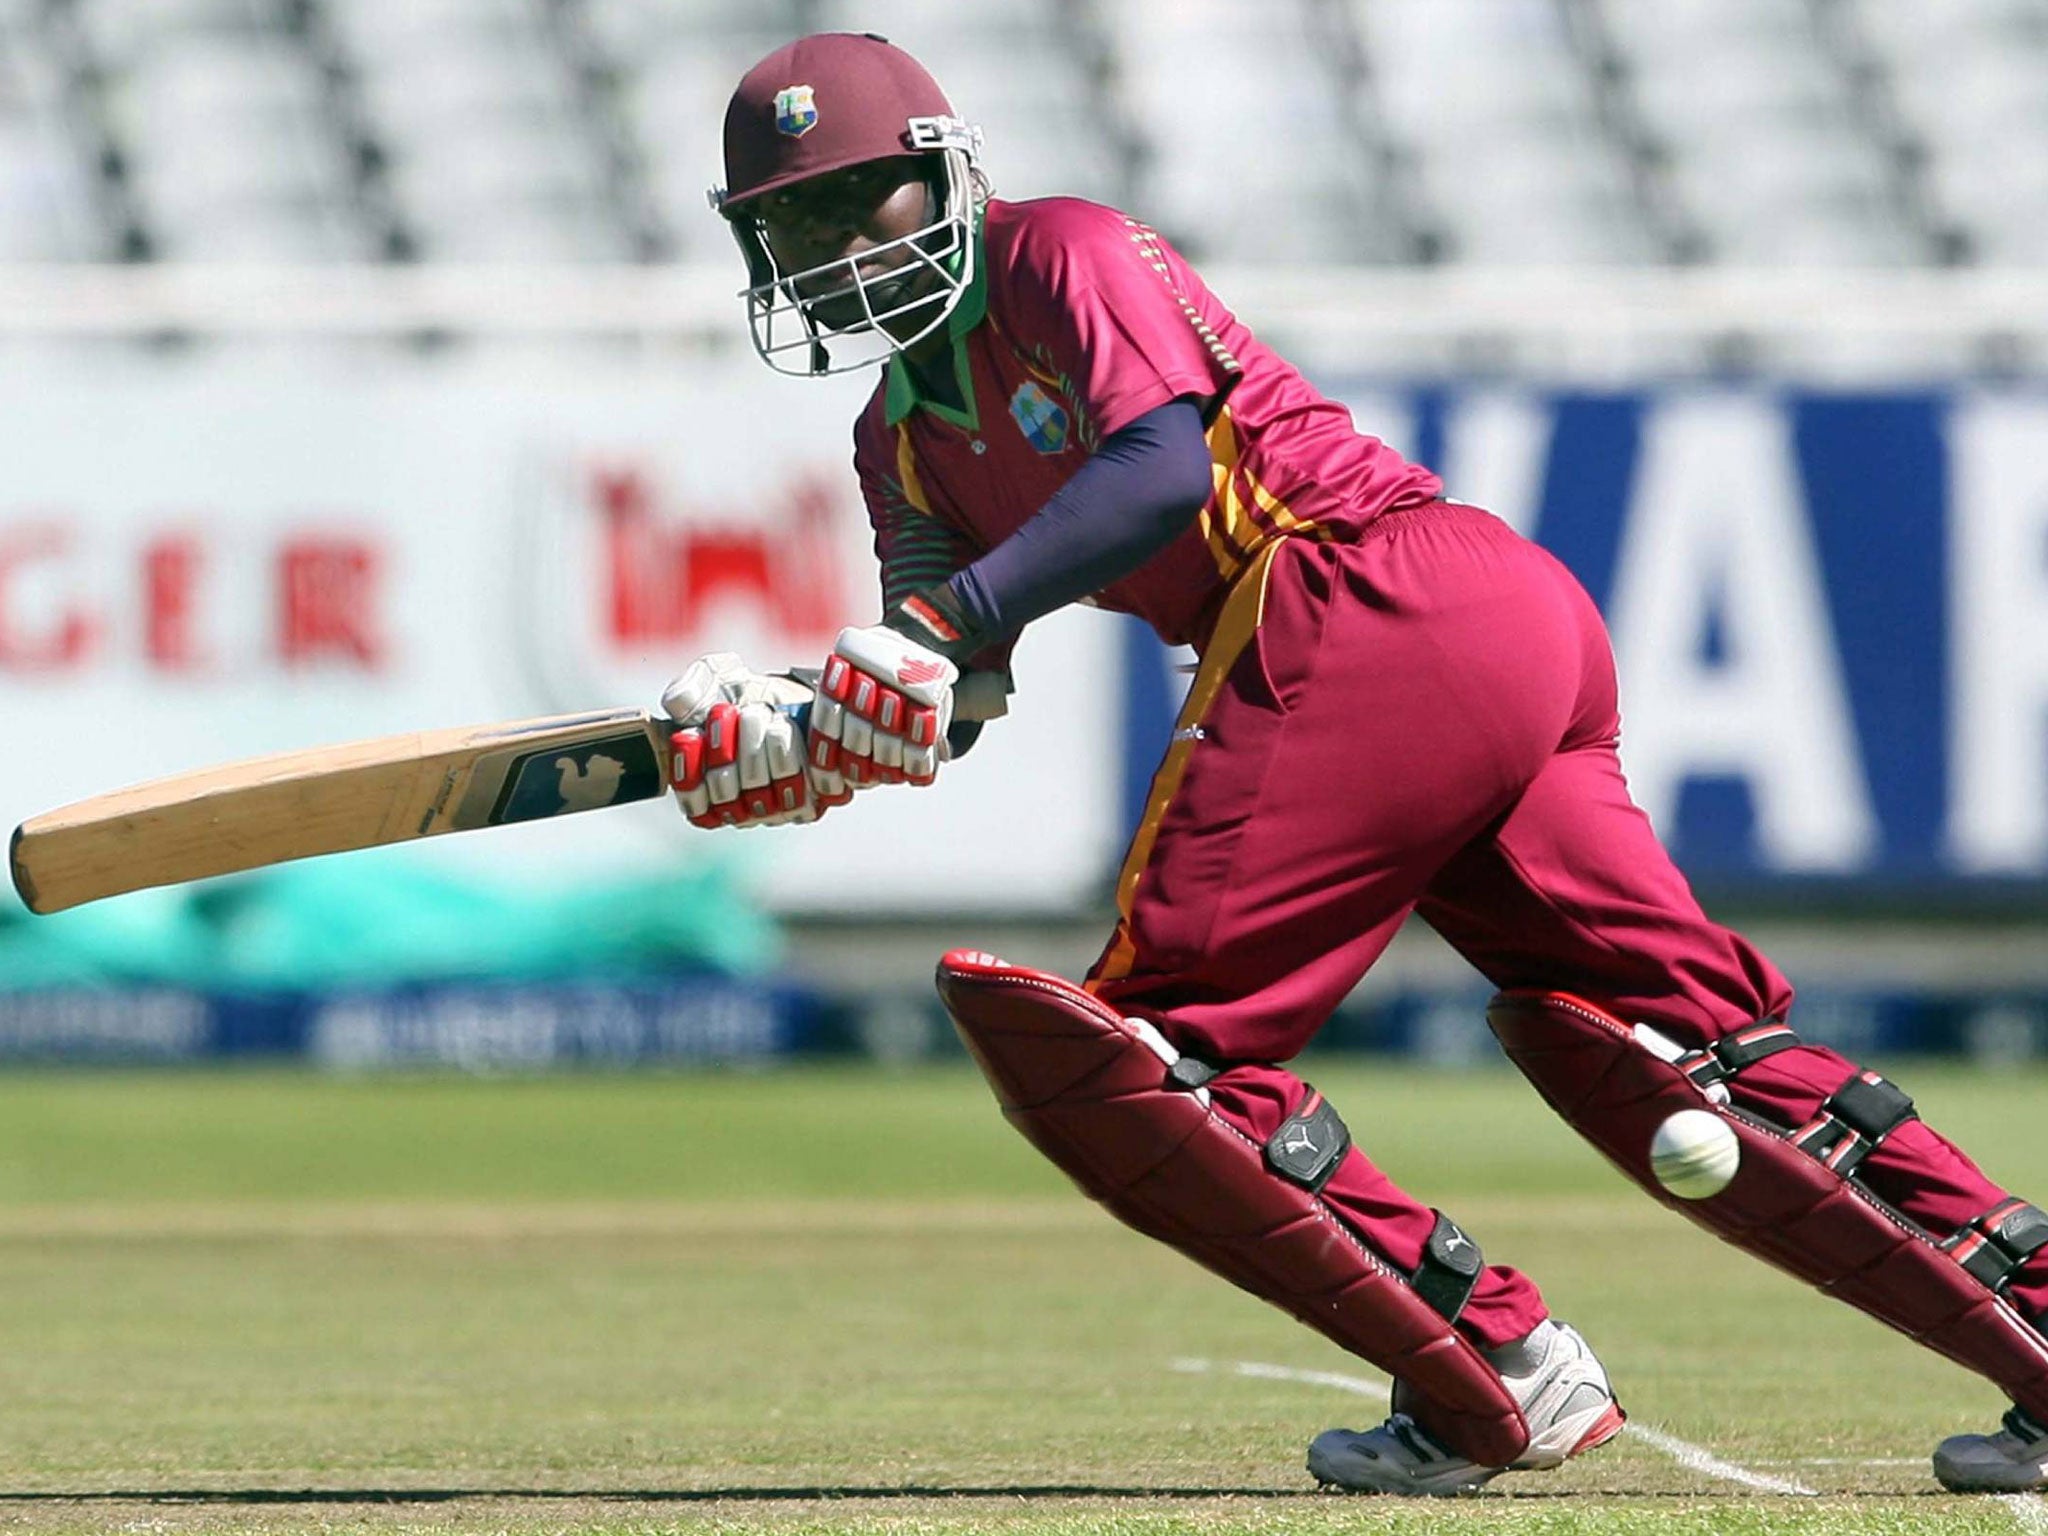 All-rounder Stefanie Taylor destroyed England with one for eight and 51 not out